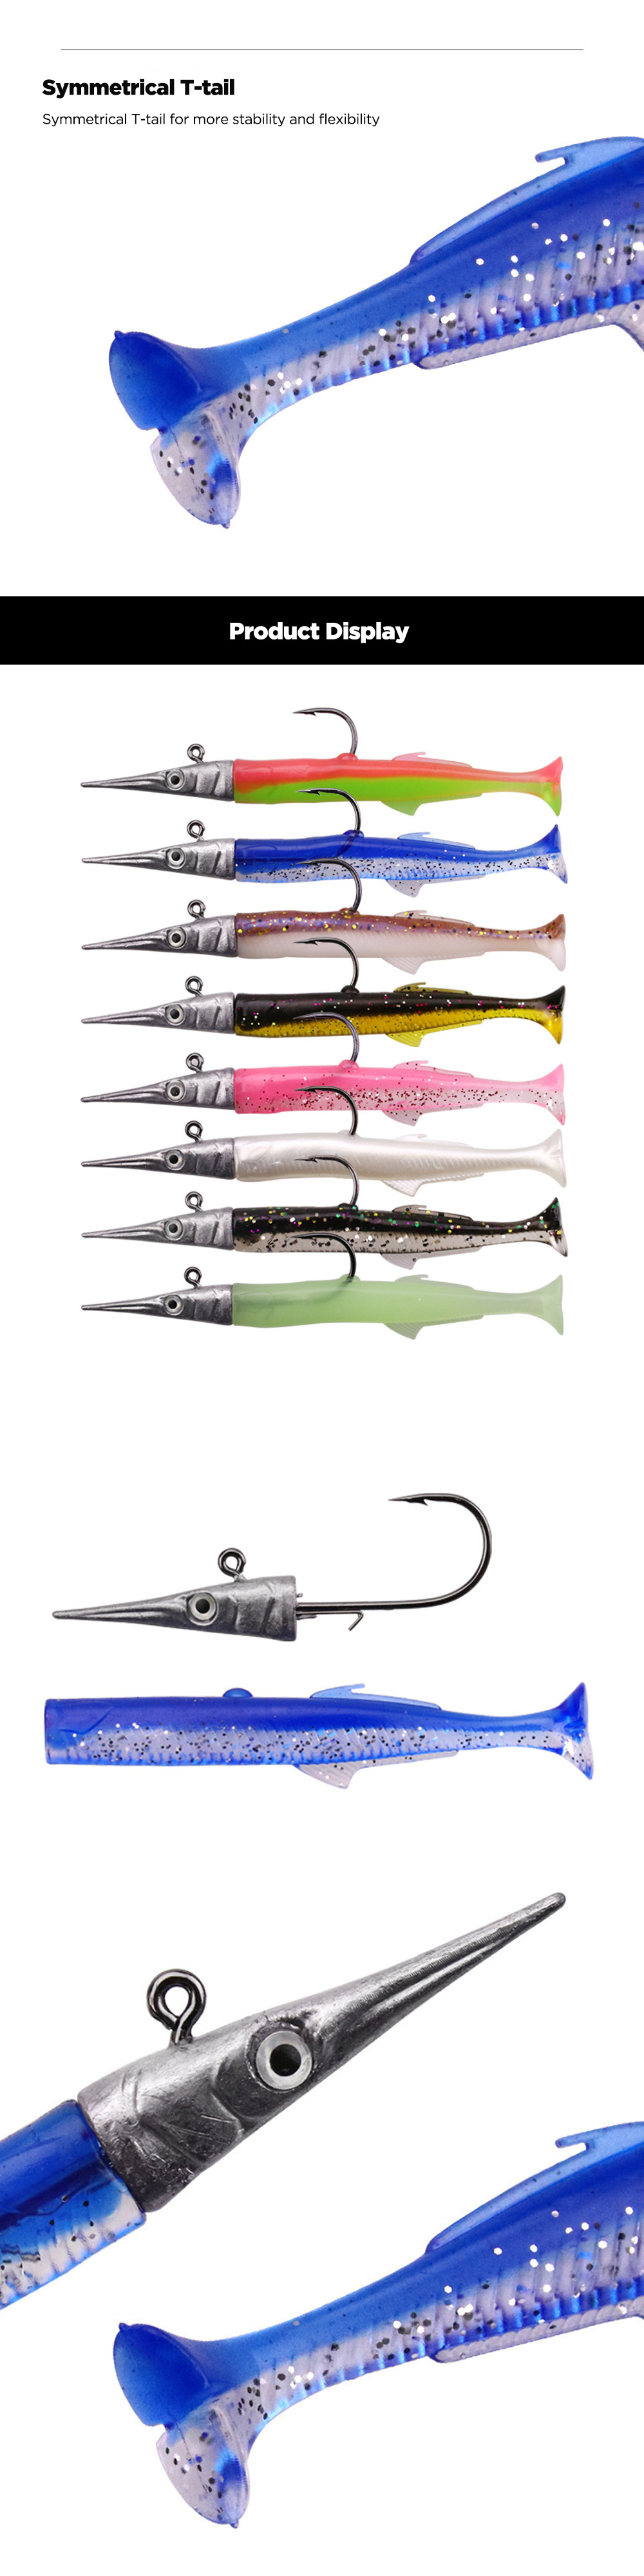 ZANLURE-11cm-40g-Fishing-Lure-Lead-Jig-Head-Soft-Lure-T-Tail-Swimbait-Artificial-Bait-with-2-Pcs-T-T-1843913-2